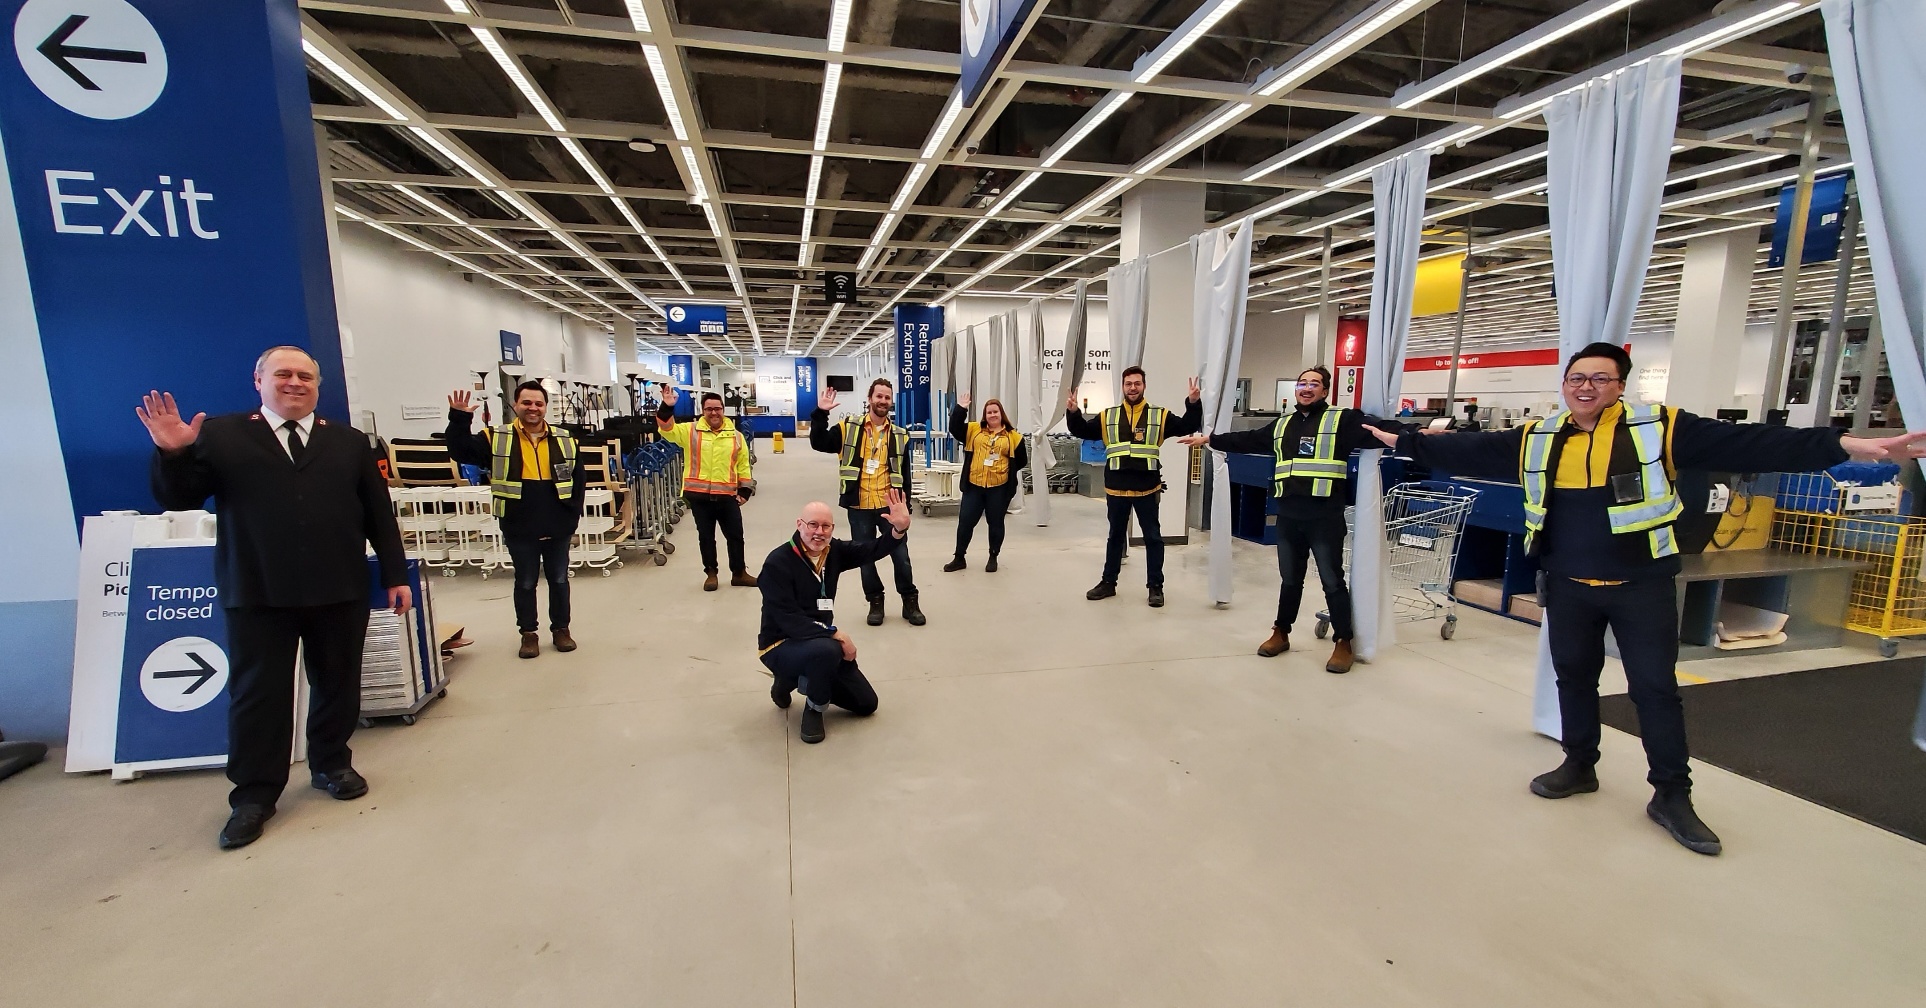 Major Gordon Taylor (left) poses with IKEA Winnipeg employees after all trucks were loaded and enroute to The Salvation Army Winnipeg Centre of Hope. Note they are following social distancing guidelines.